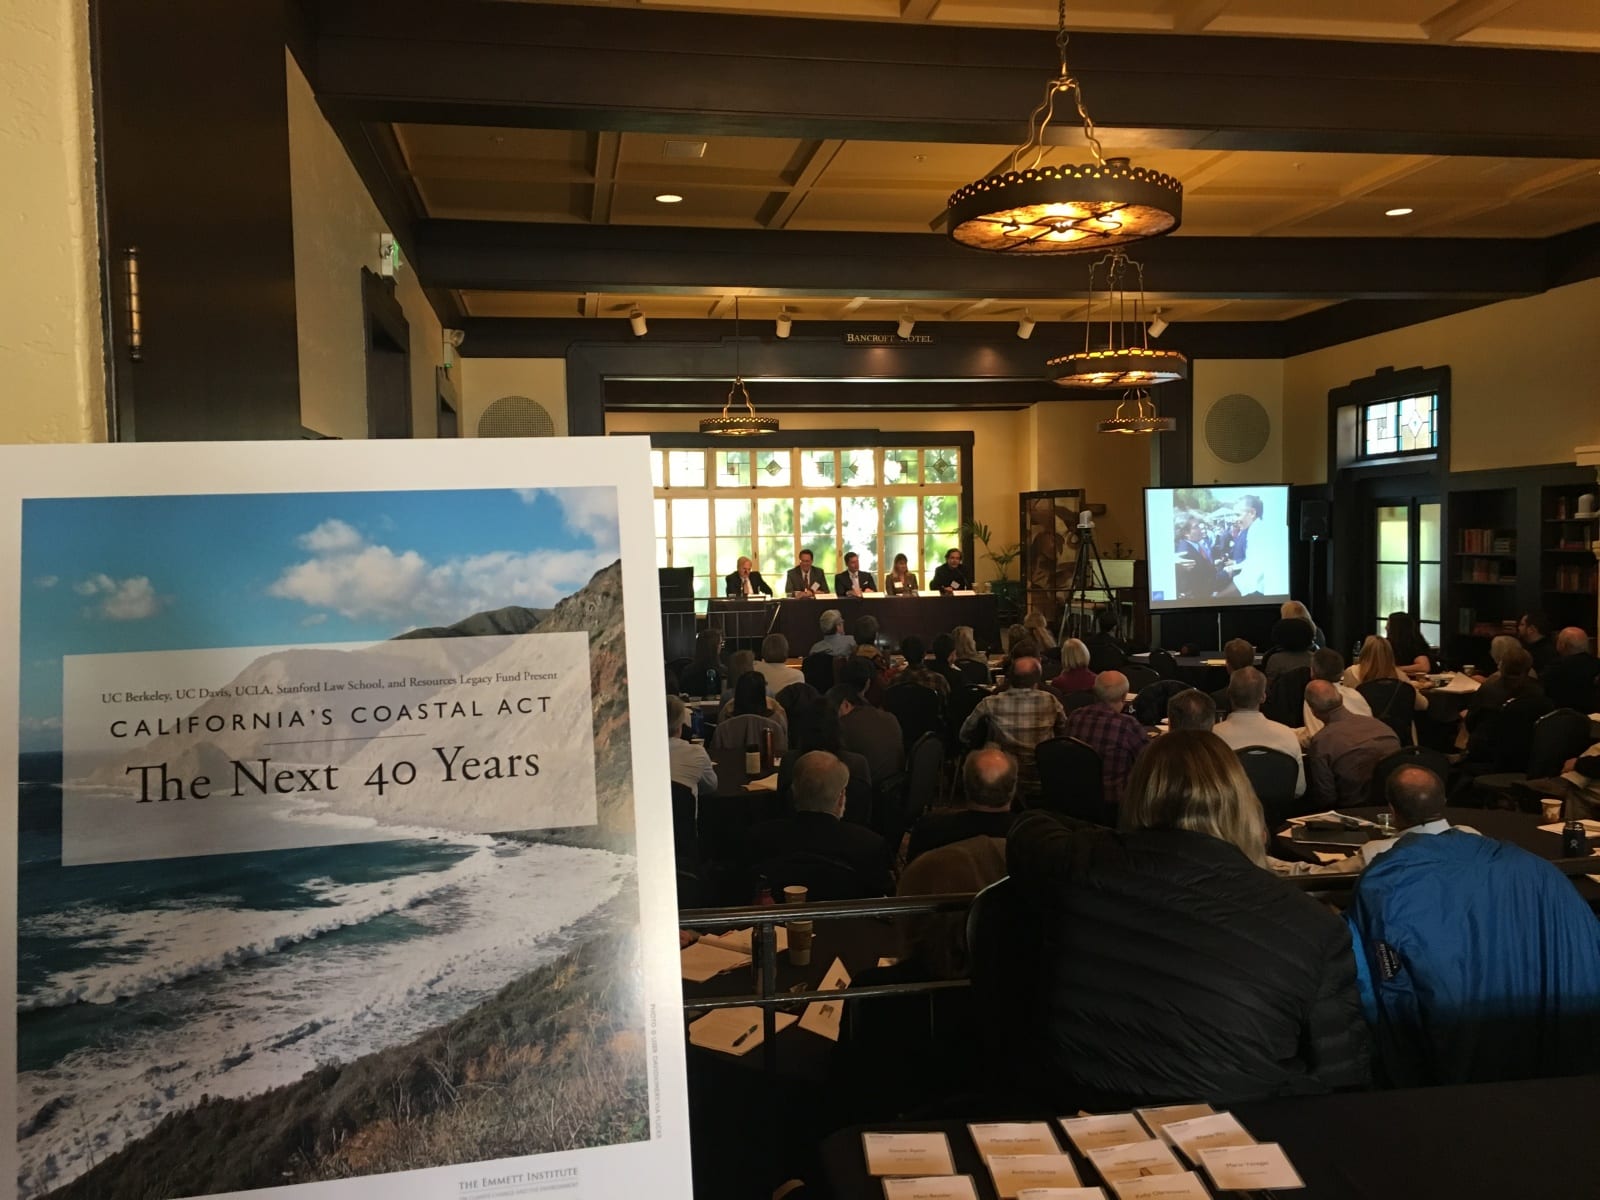 Attendees of California's Coastal Act: The Next 40 Years watch speakers present